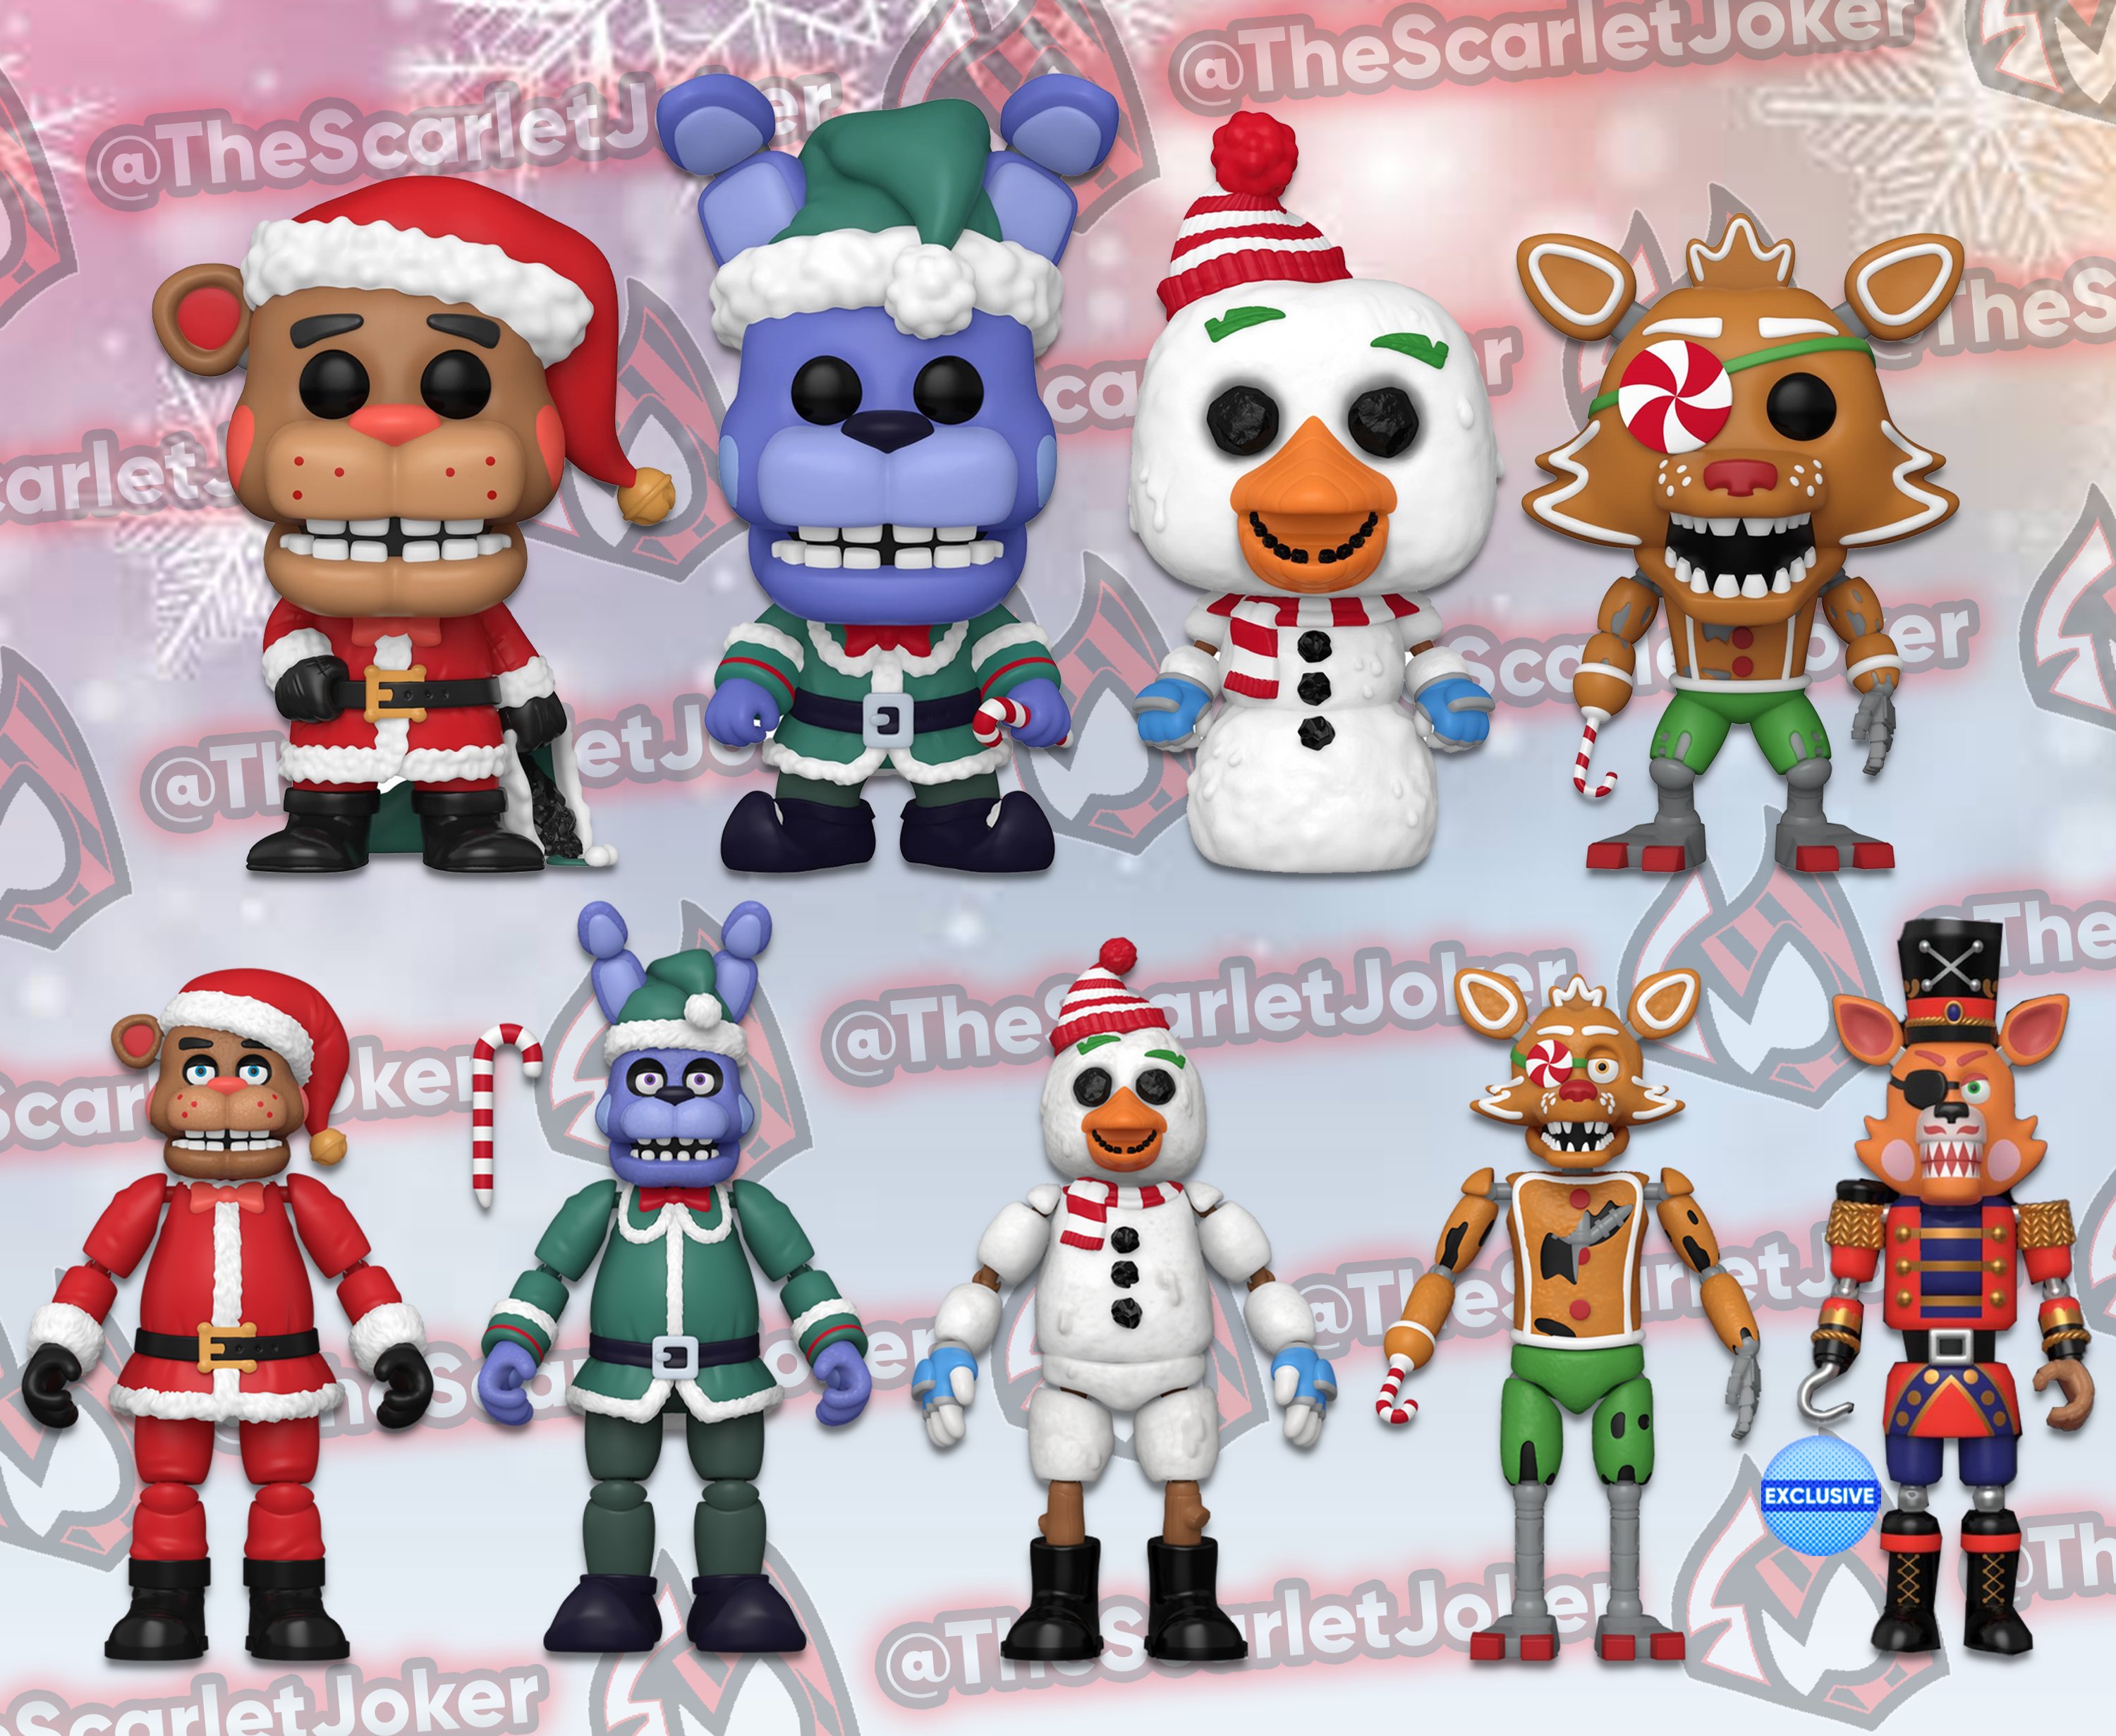 Scarlet Joker on X: First look at the Holiday Five Nights at